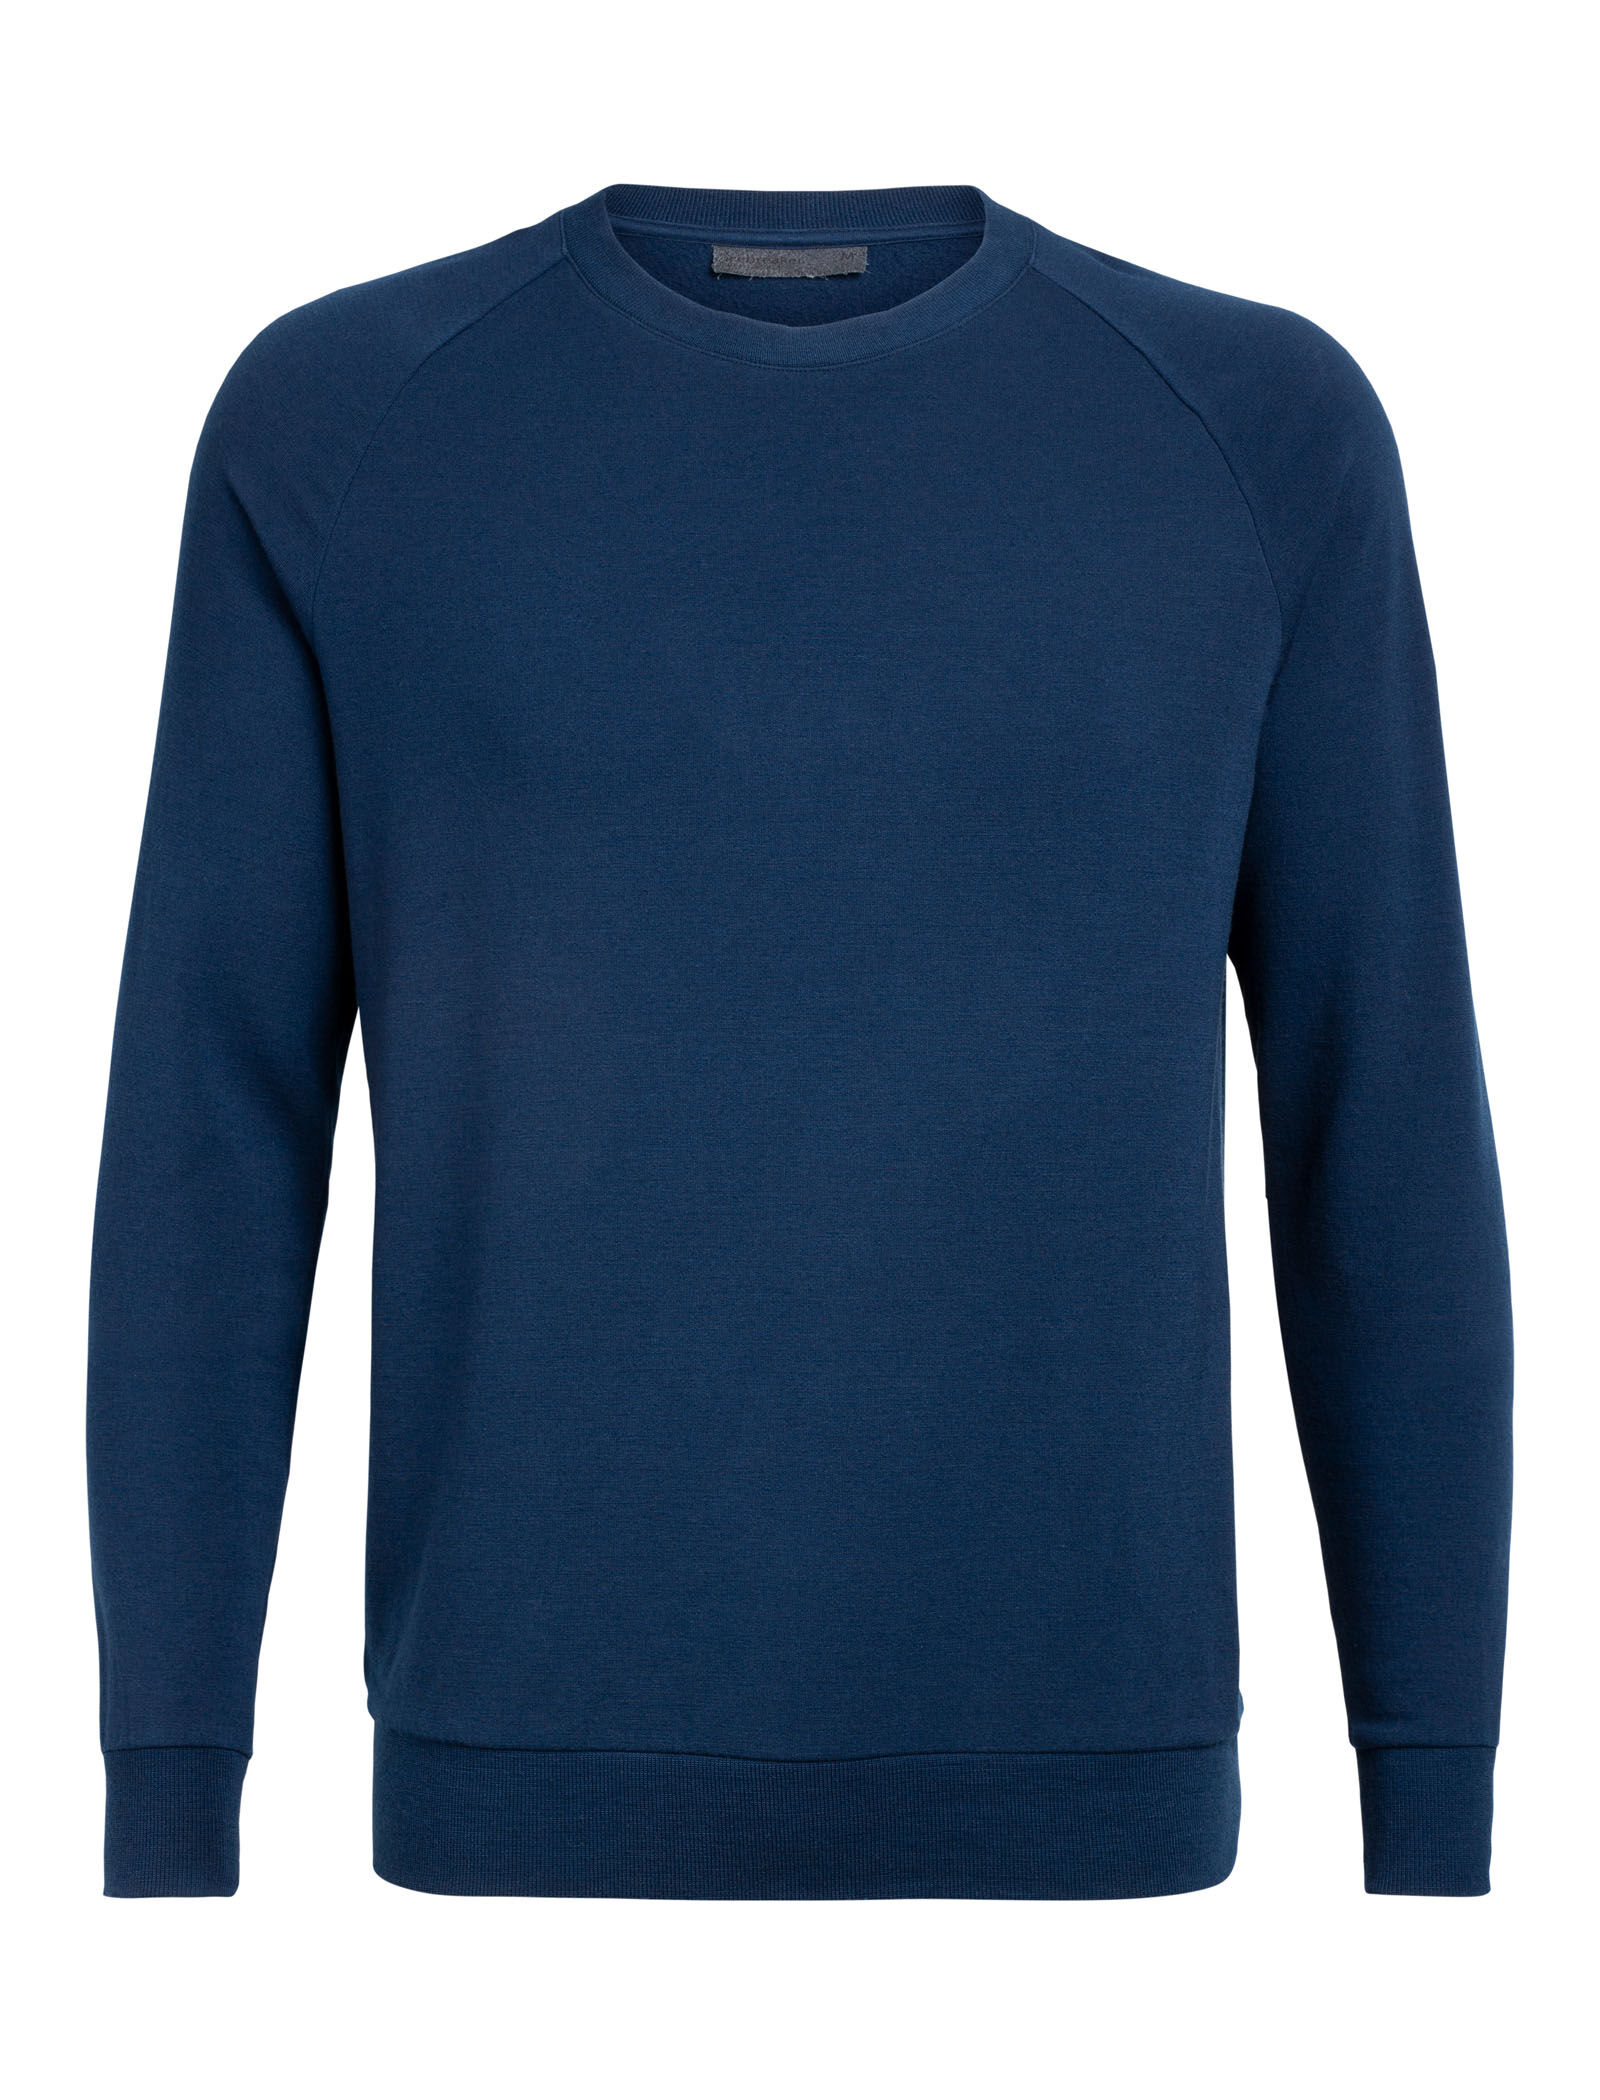 Sweatshirt A Top Sellers, UP TO 57% OFF | www.realliganaval.com